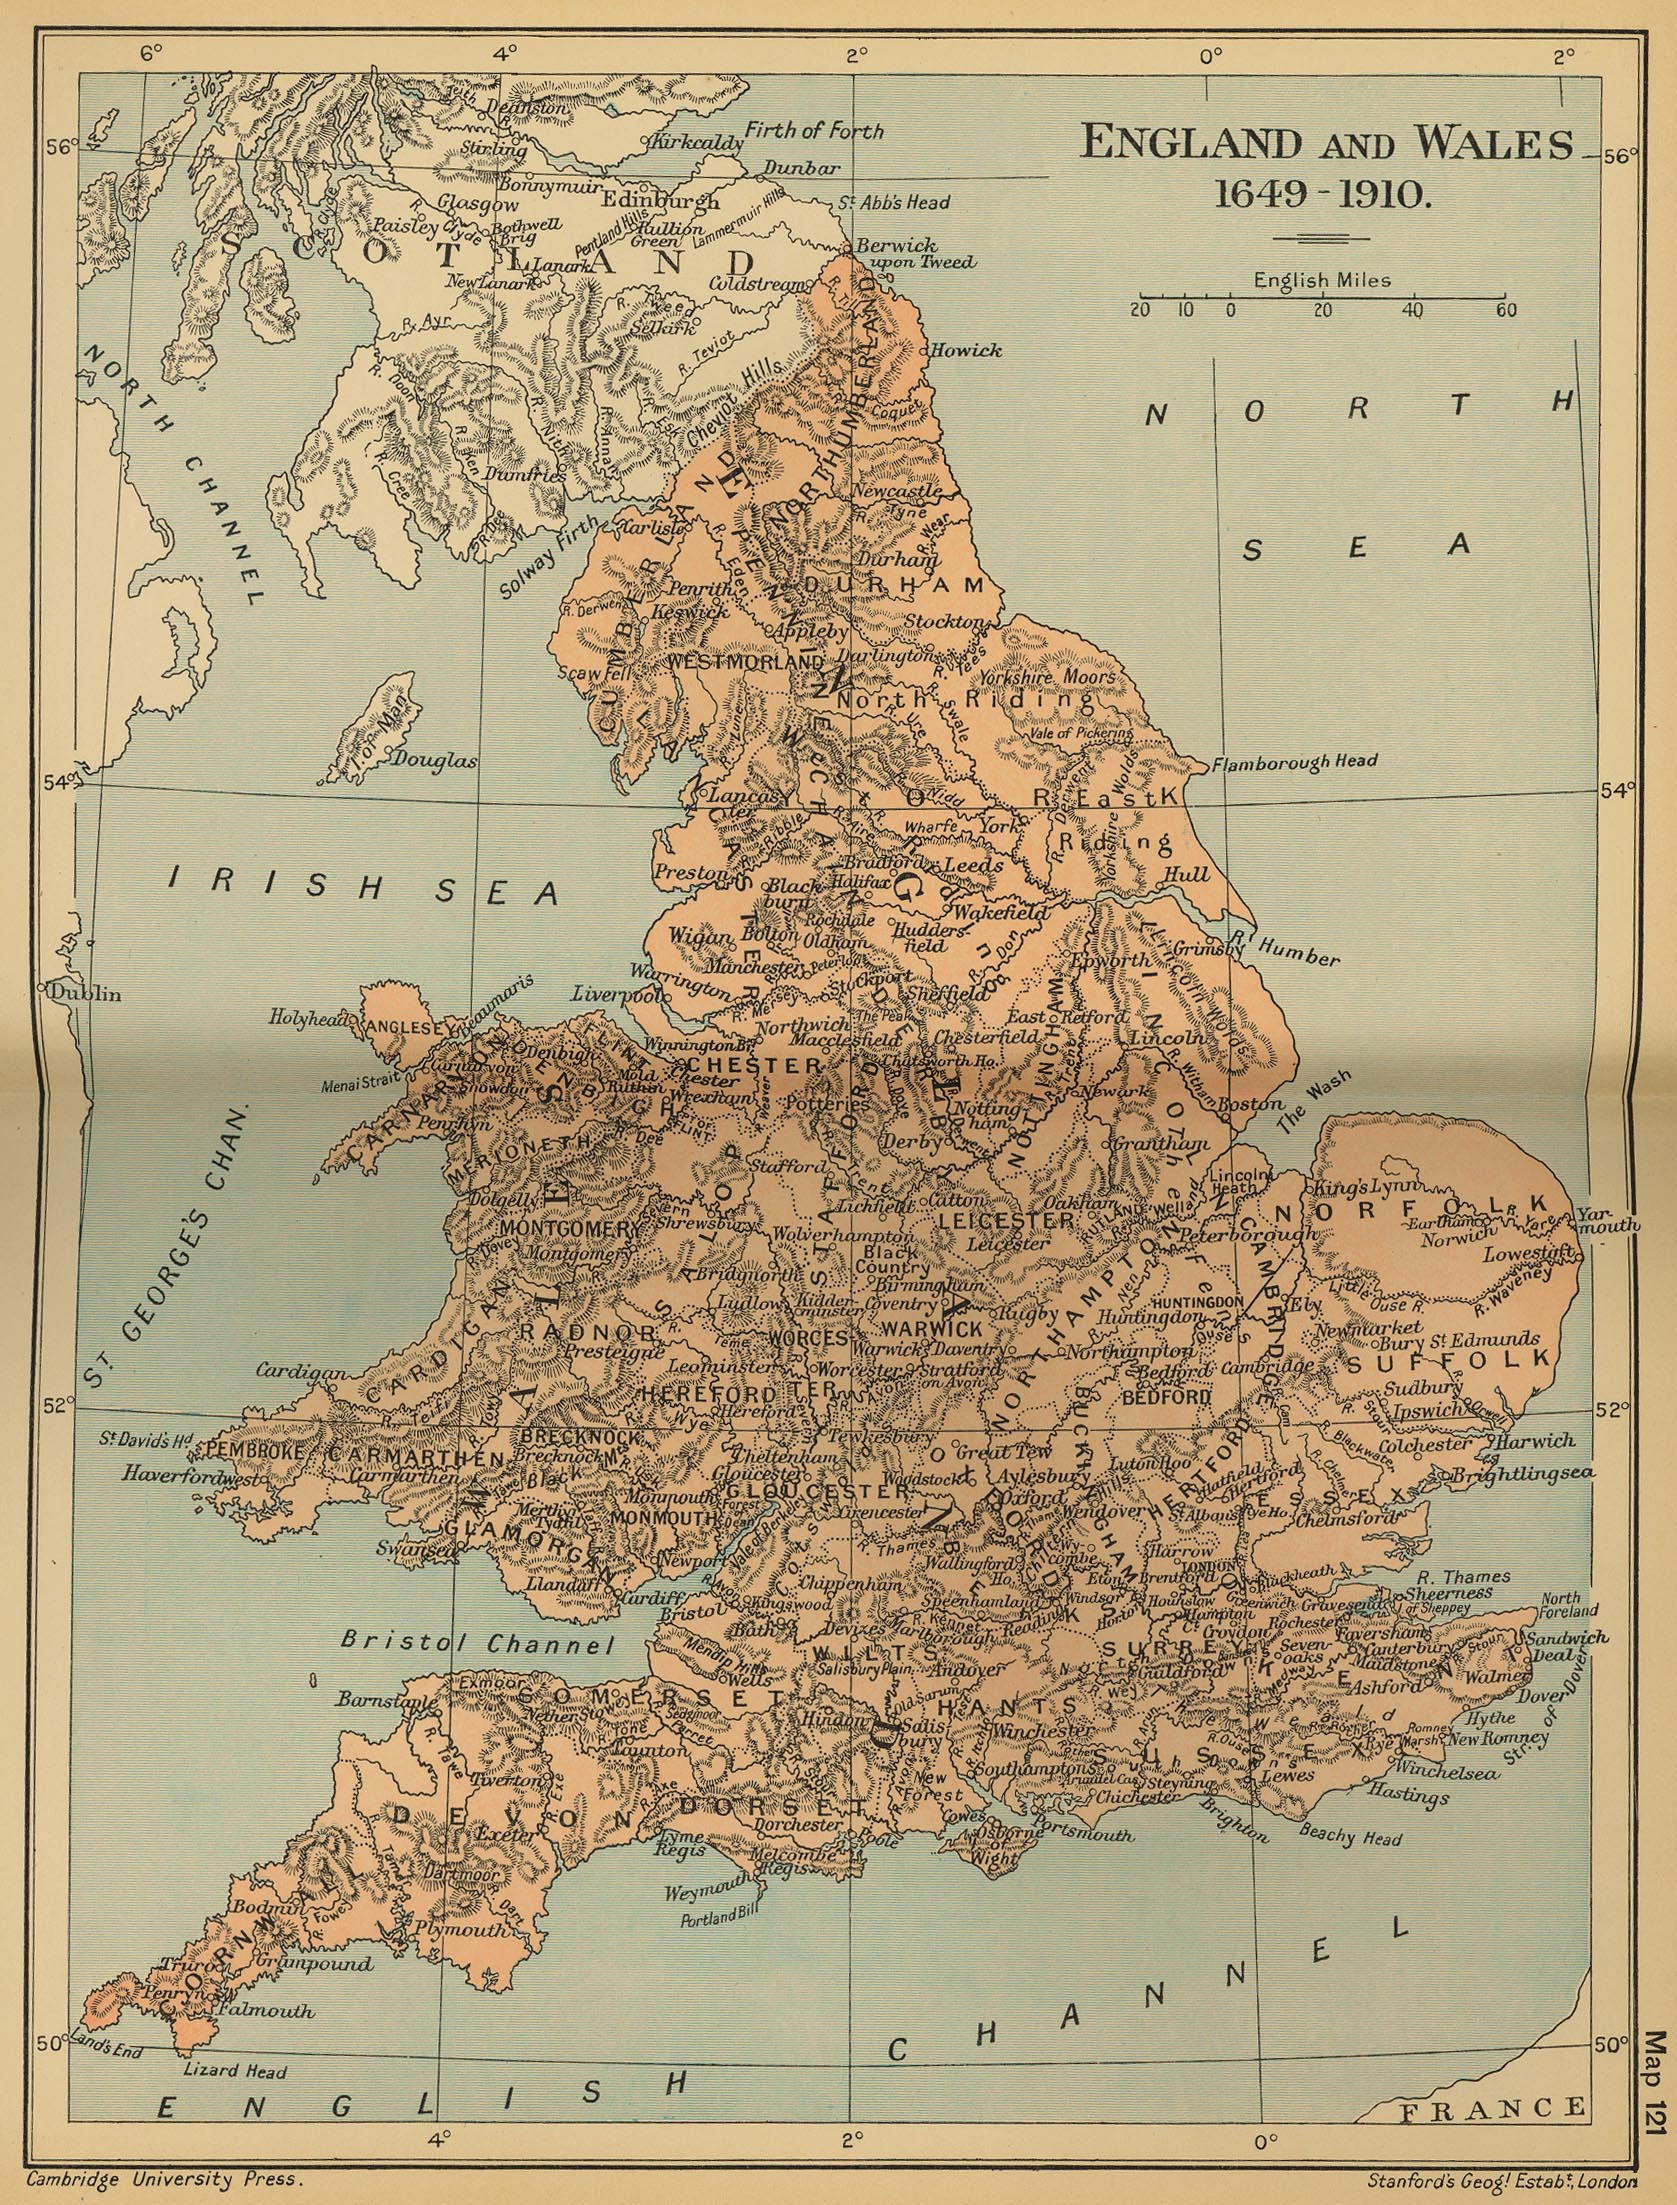 Map of England and Wales 1649-1910